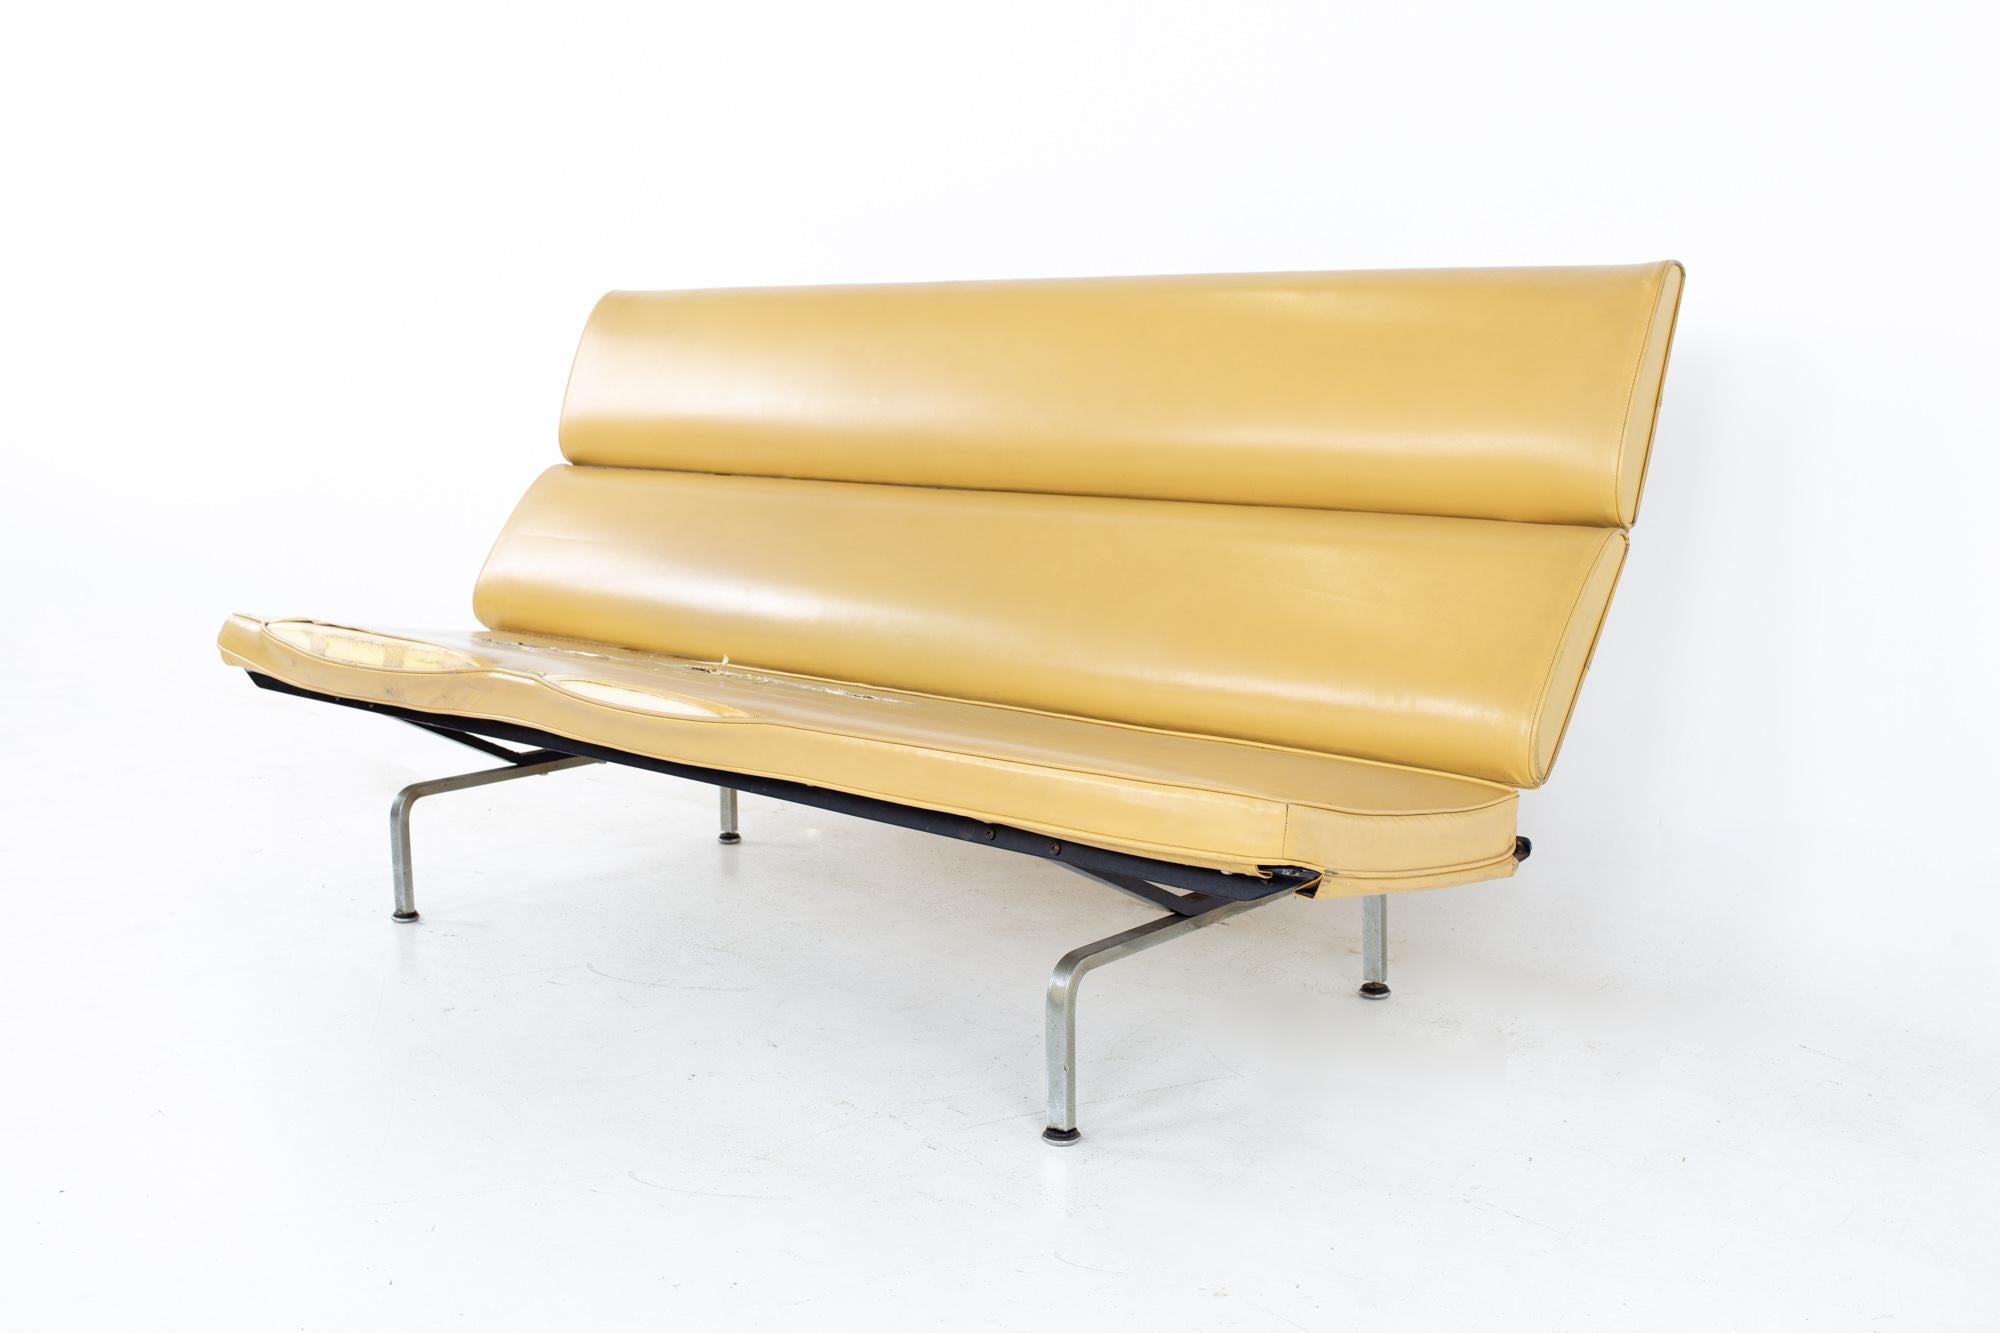 Early Charles and Ray Eames for Herman Miller Mid Century compact daybed sofa
Sofa measures: 72 wide x 30 deep x 35 high, with a seat height of 18 inches 

All pieces of furniture can be had in what we call restored vintage condition. That means the